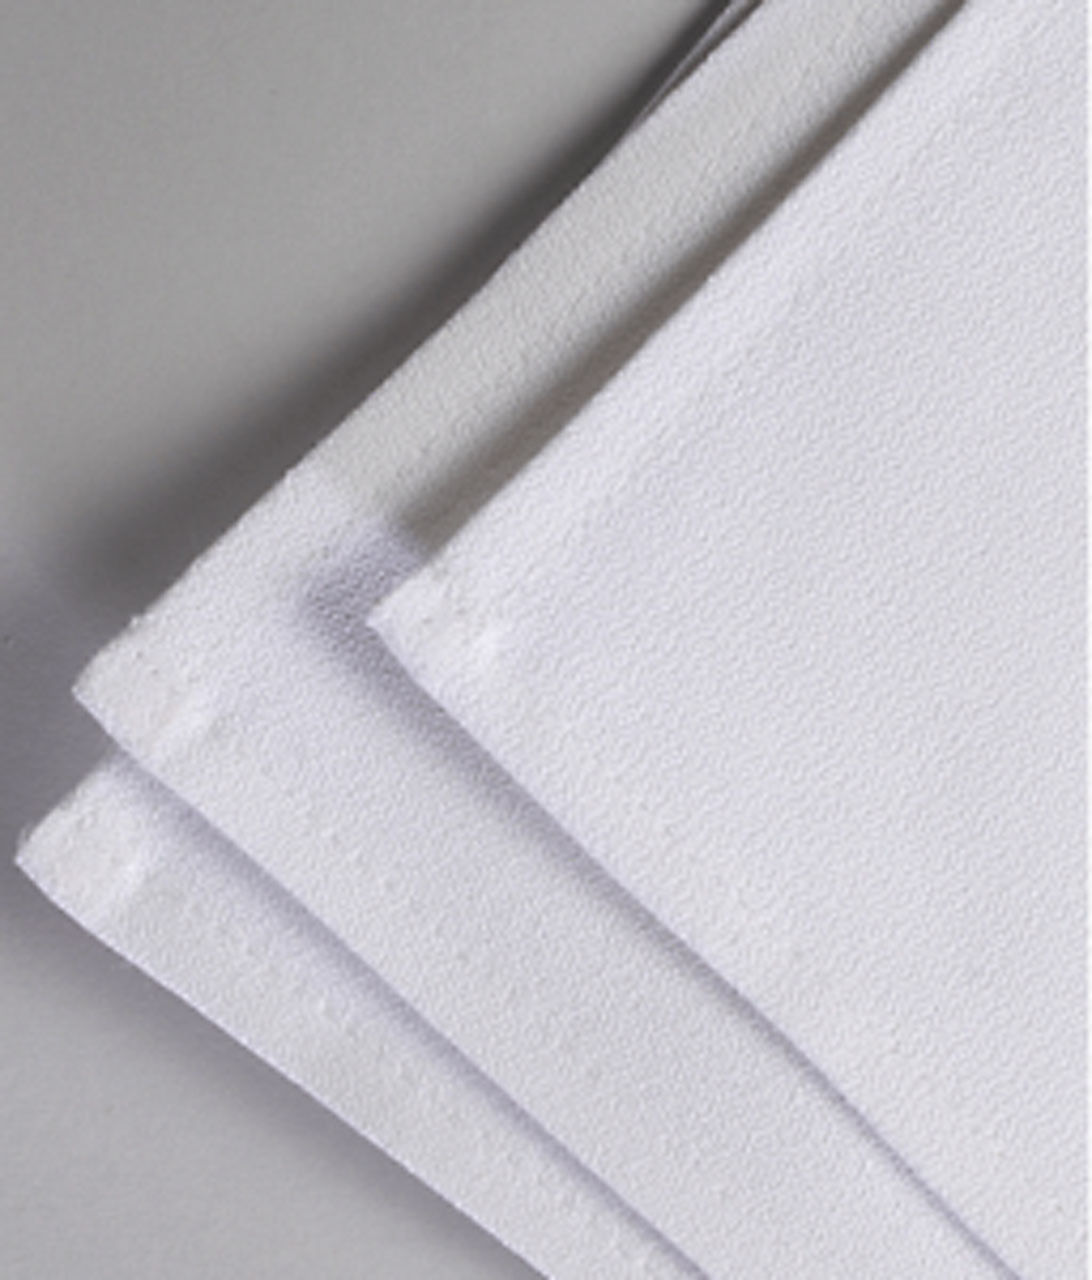 Is the material of the White Cotton Napkins momie fabric?